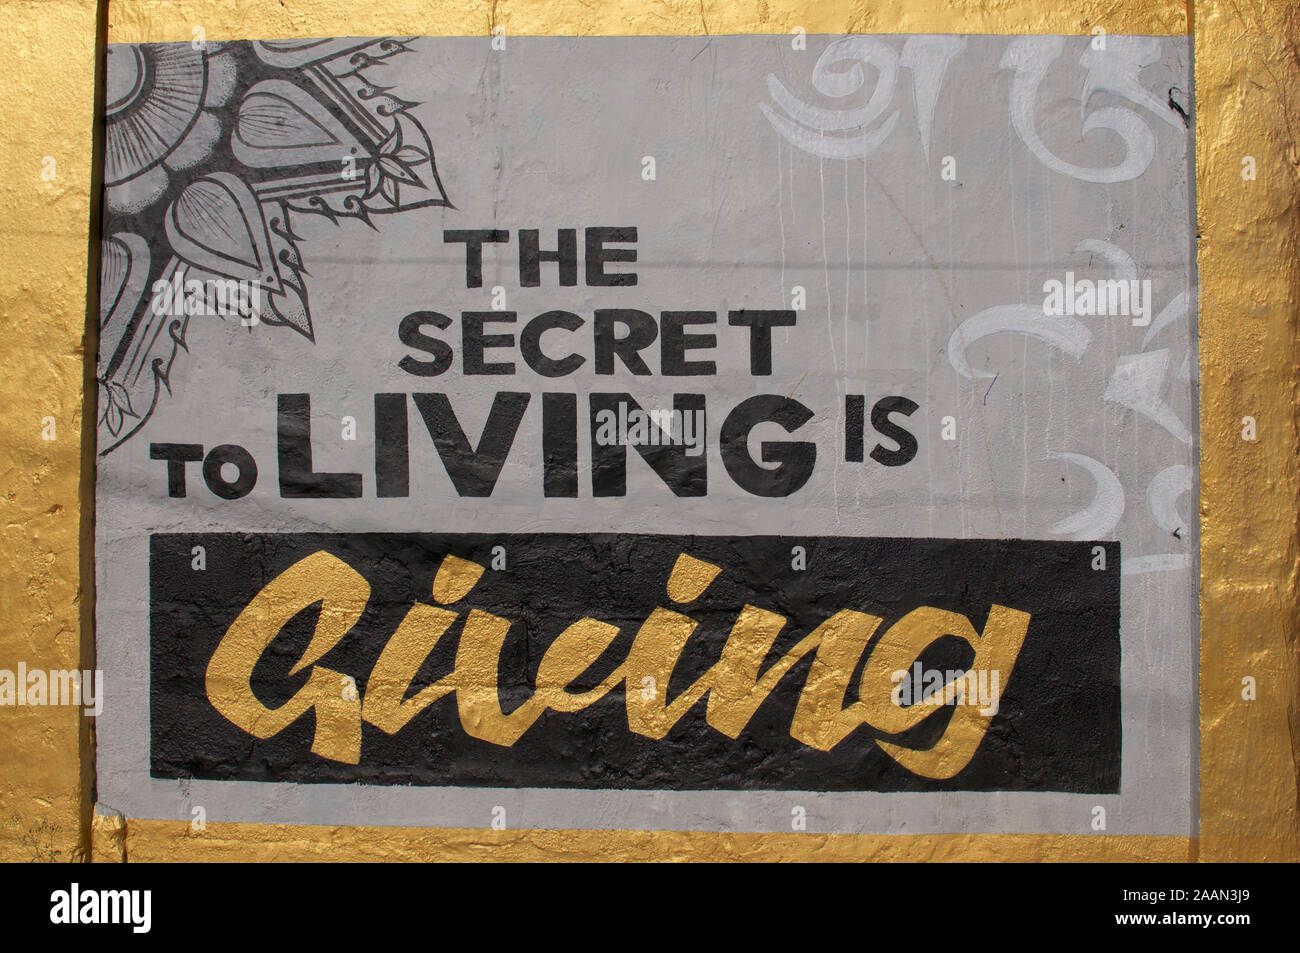 Ubud, Bali, Indonesia - 20th April 2019 : Beautiful mural art work with the quote 'The secret to living is giving' painted on a wall in the village of Stock Photo